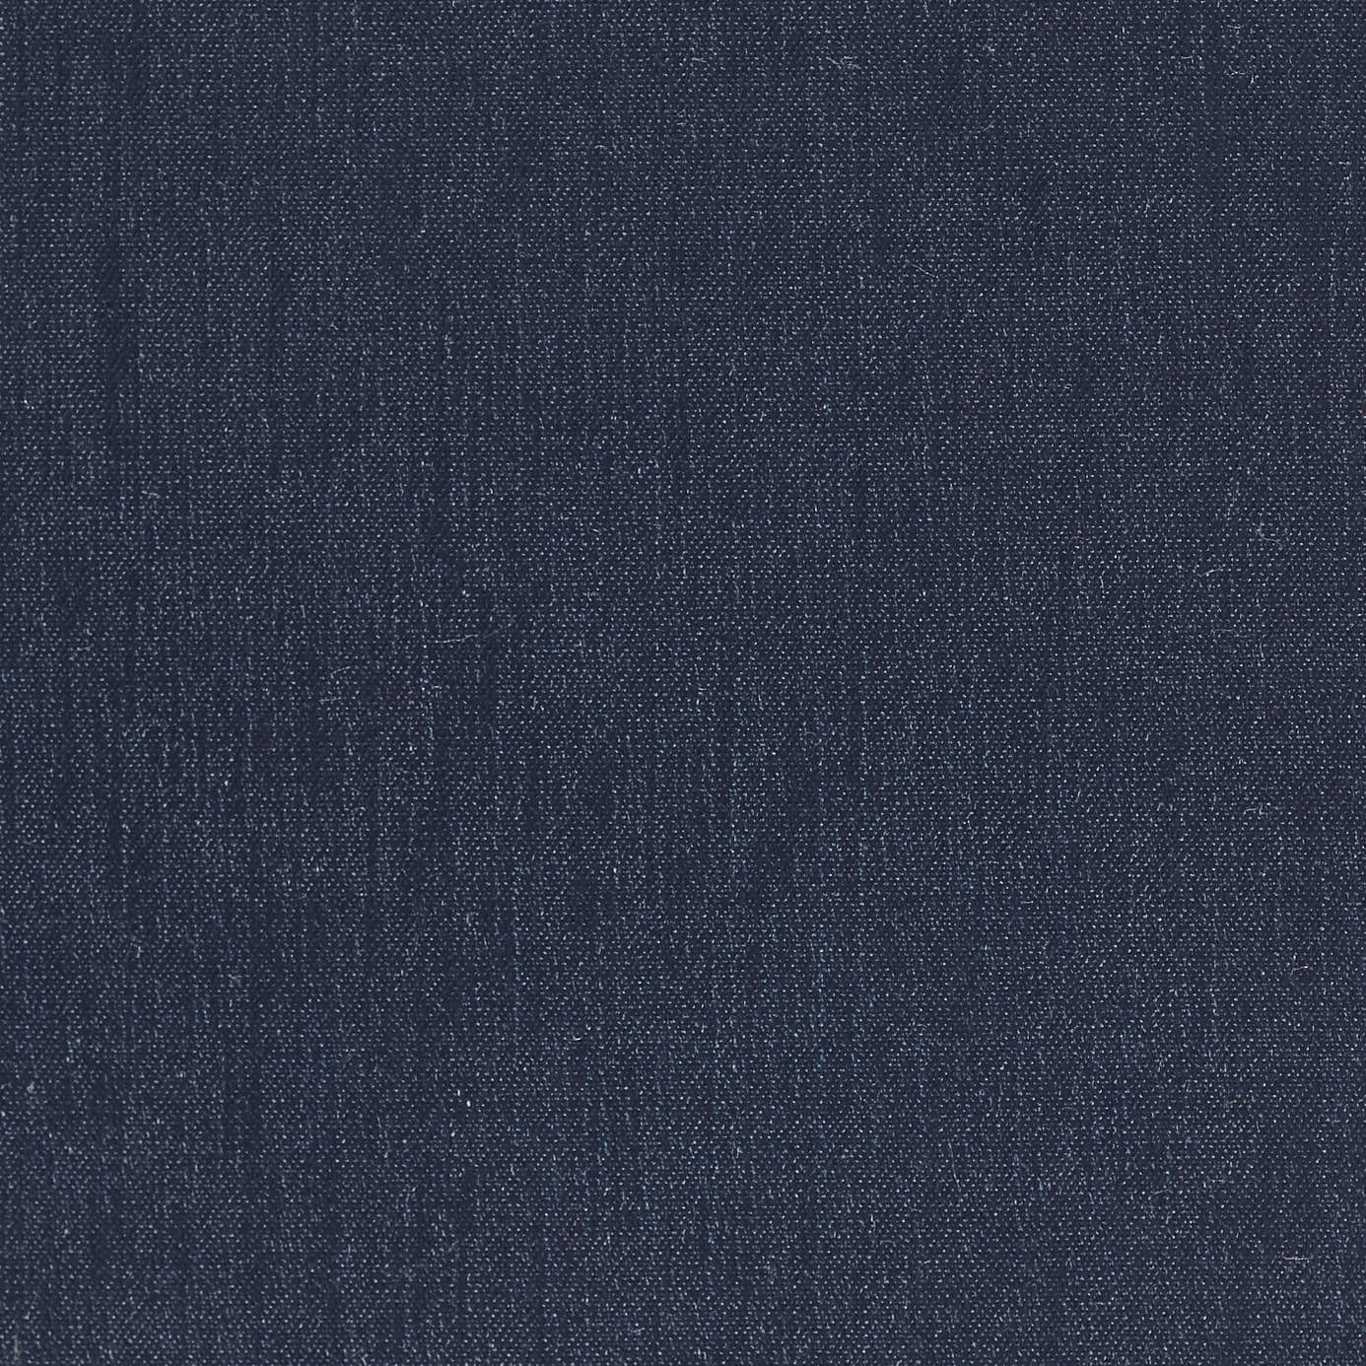 Spectro Slate Fabric by HAR